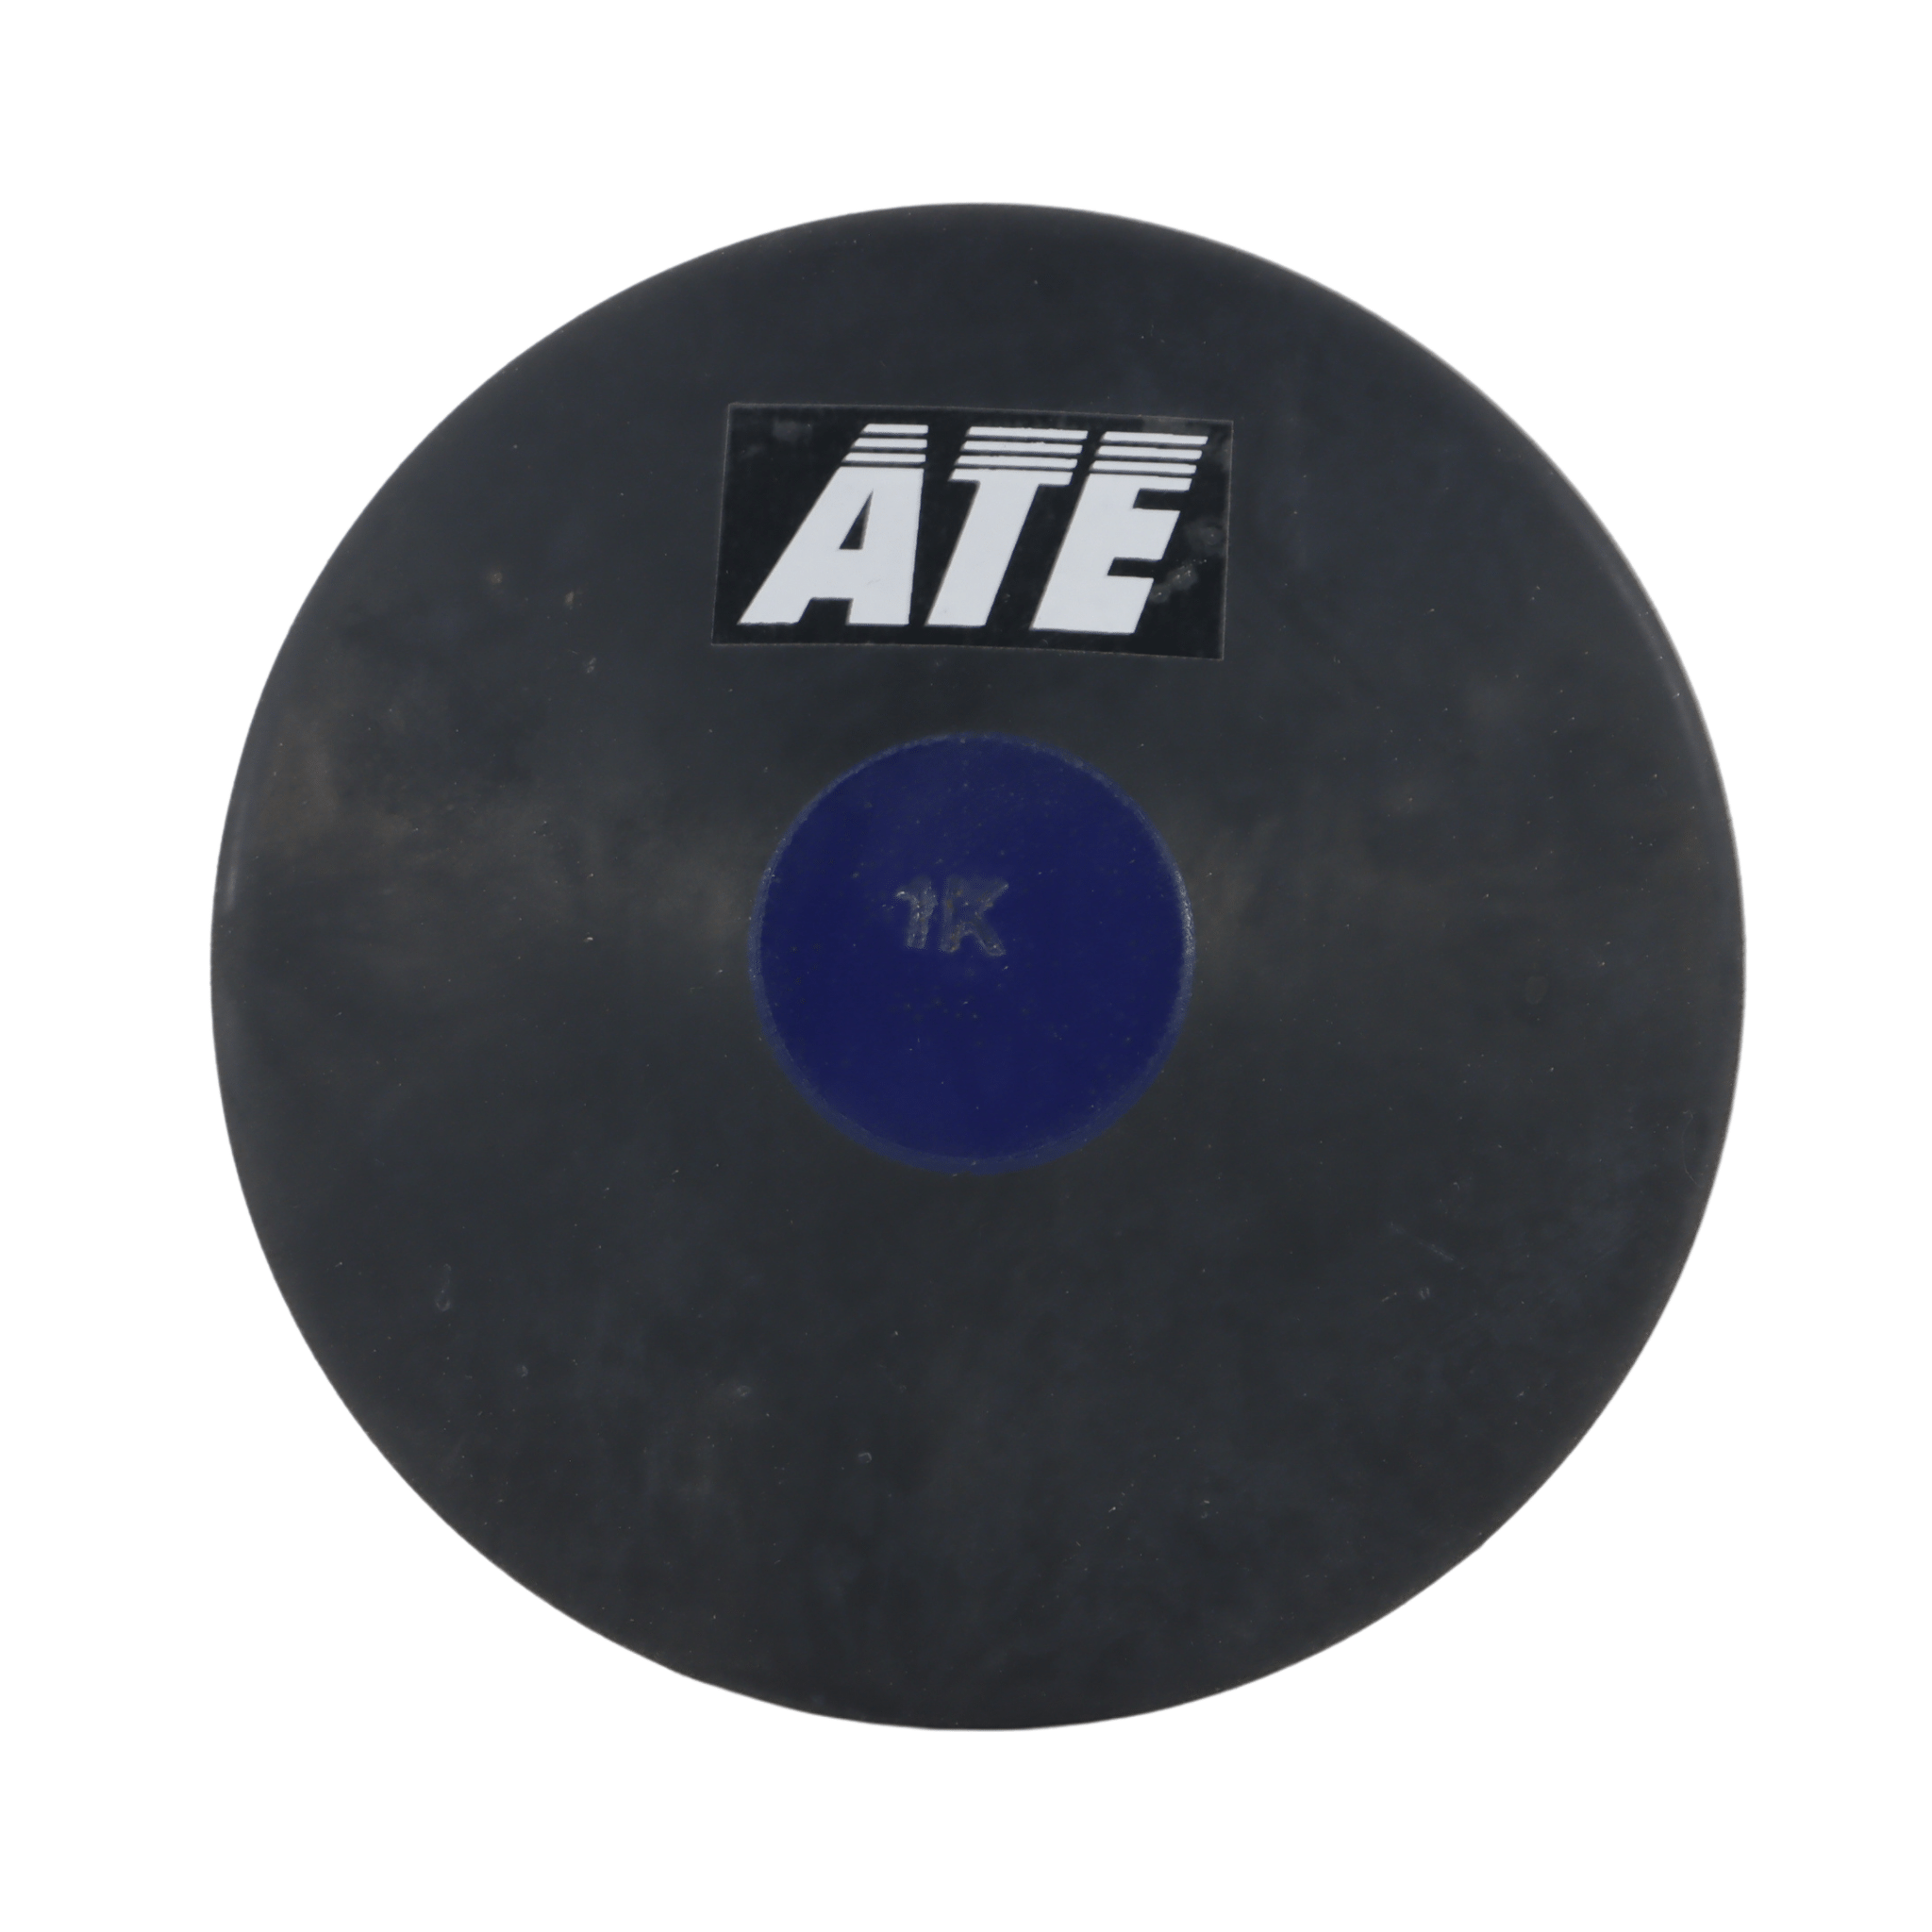 Rubber Discus | Solid black rubber with blue centre 1kg | ATE brand